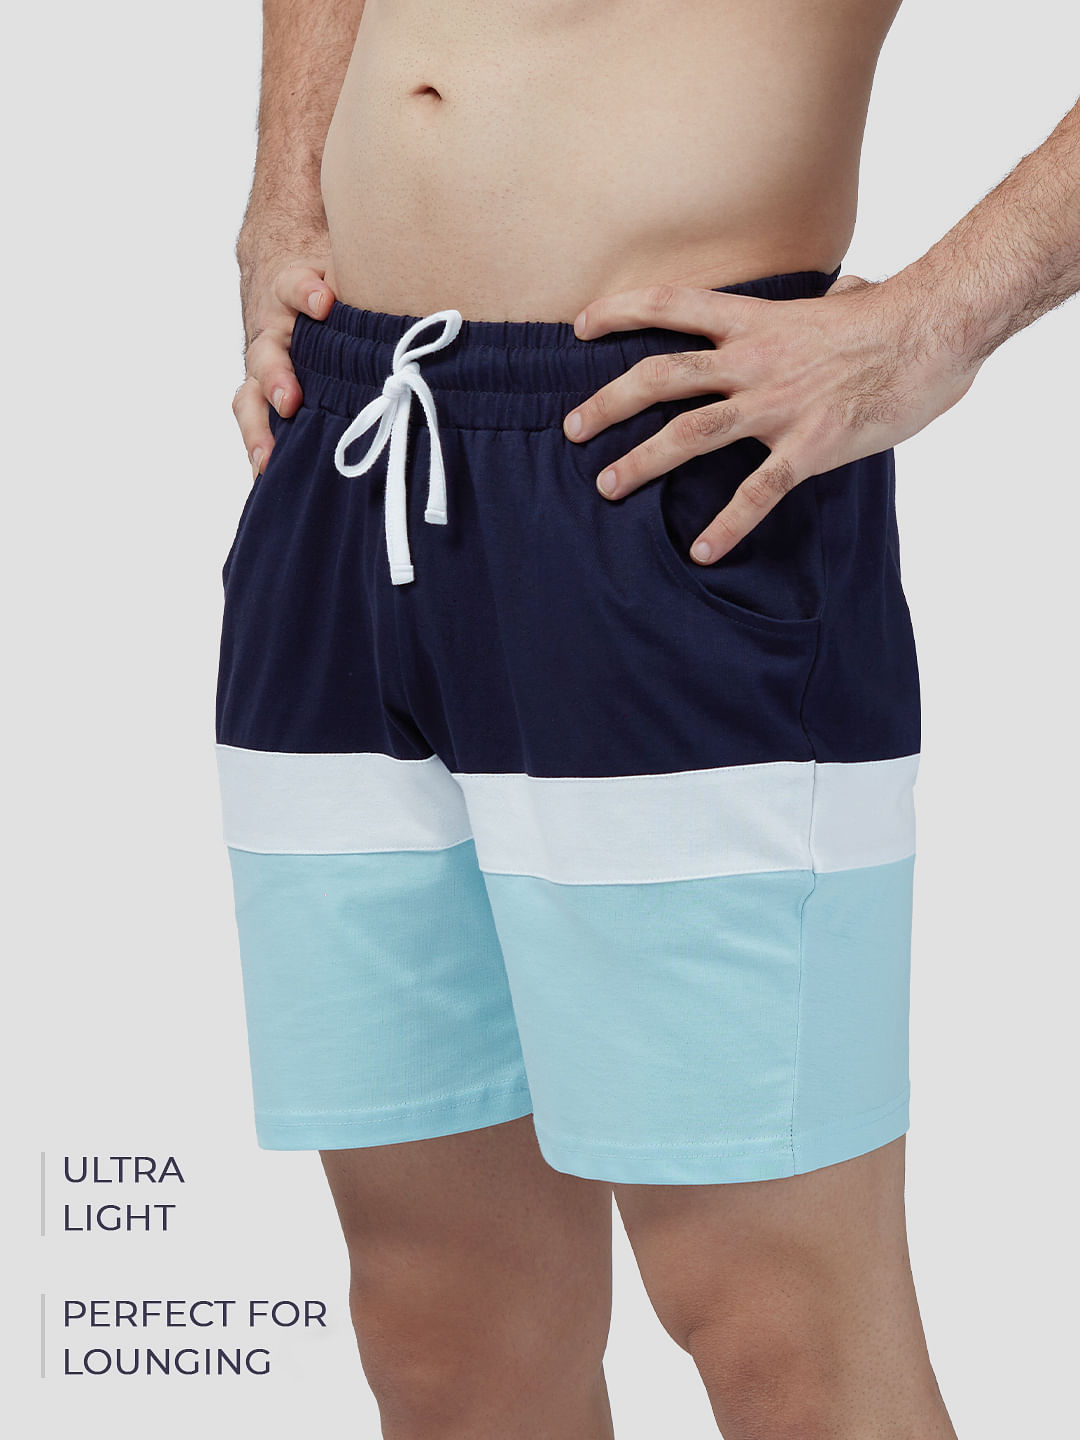 Buy Solid Blue And White Ultra Light Shorts Online